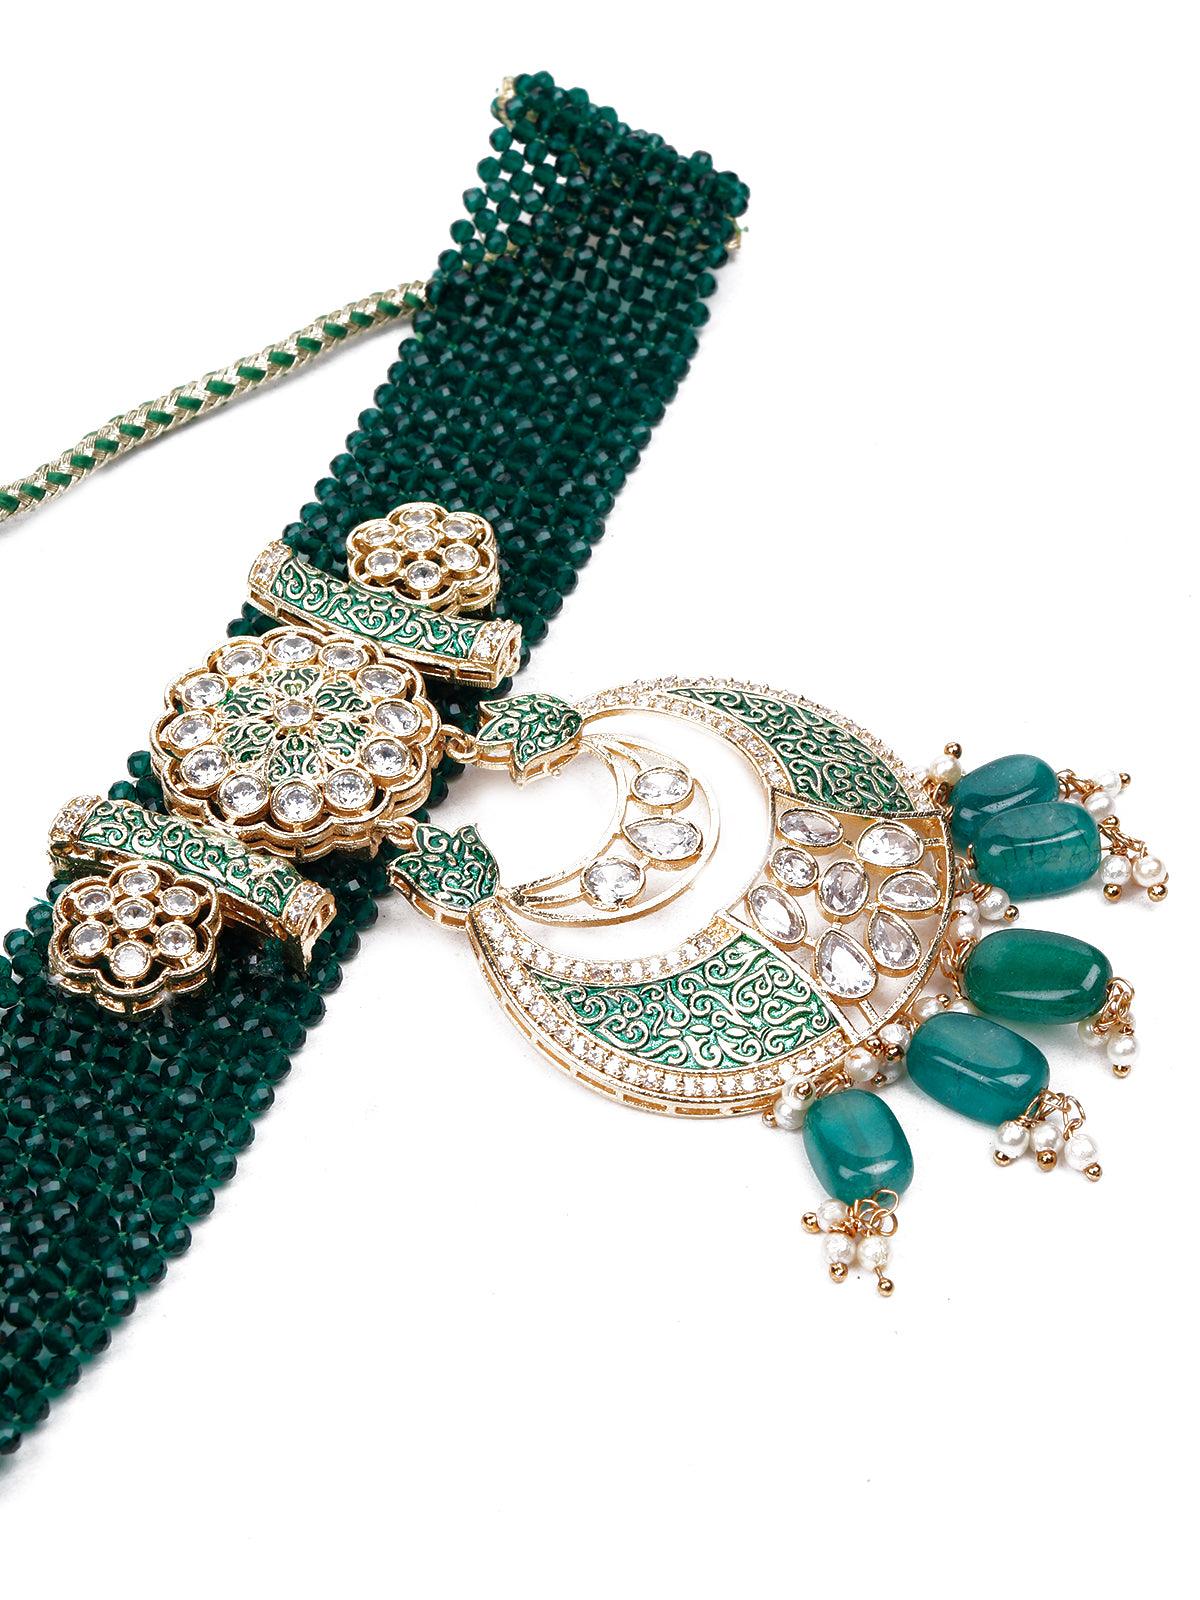 Royal emerald green choker necklace with a gorgeous pendant jewellery set&nbsp; - Odette